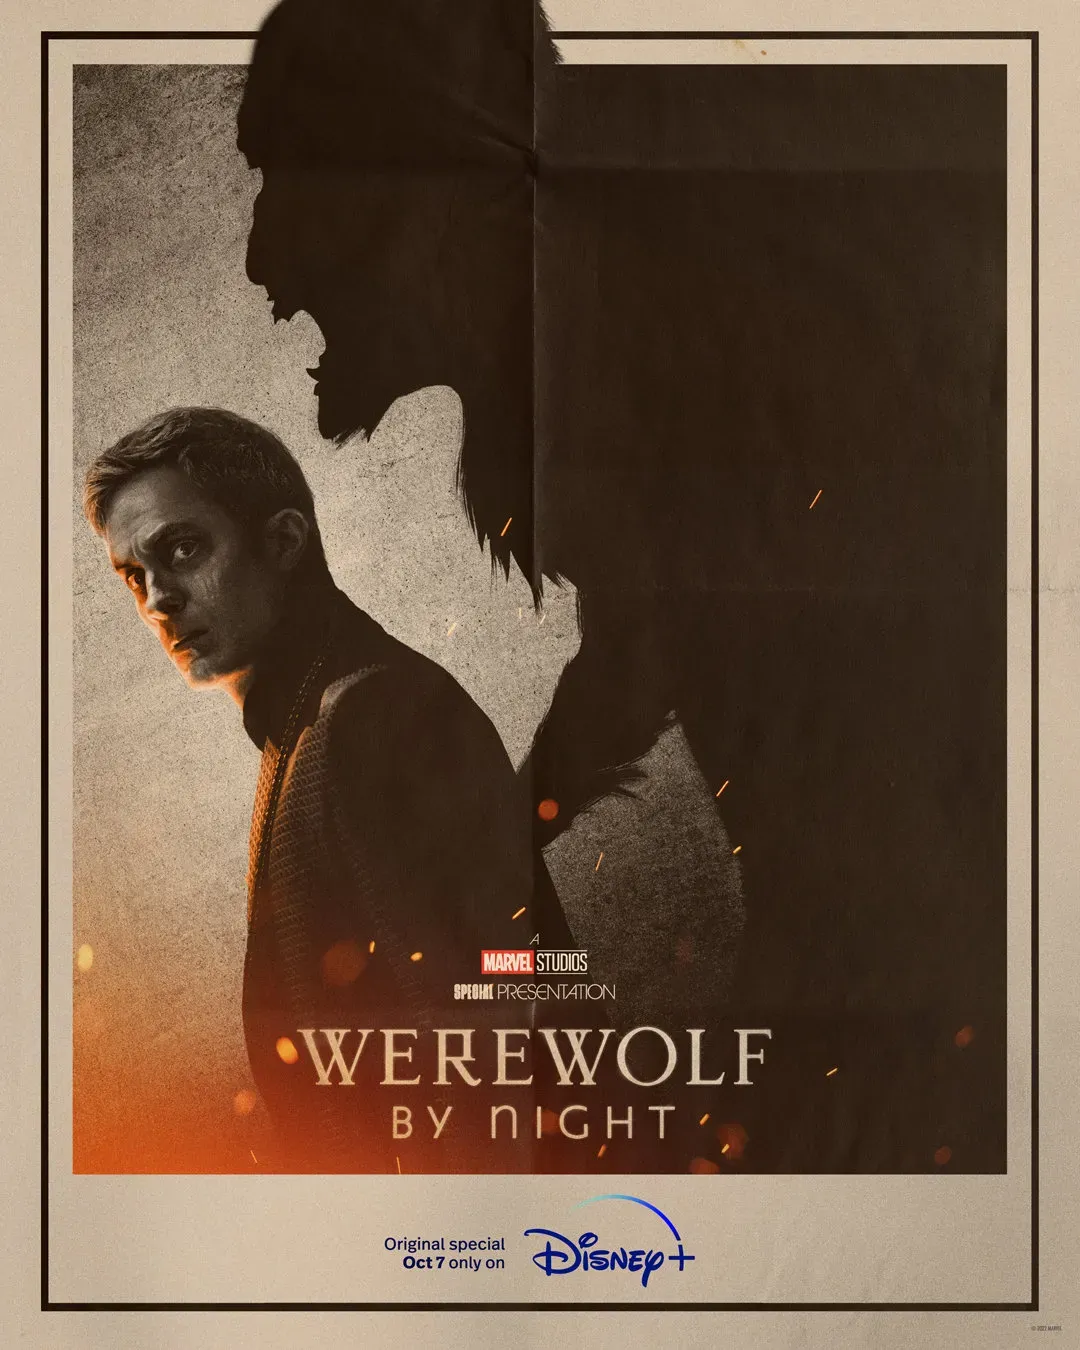 Marvel Studios’ Special Presentation 'Werewolf By Night' Release Official Trailer and Poster | FMV6